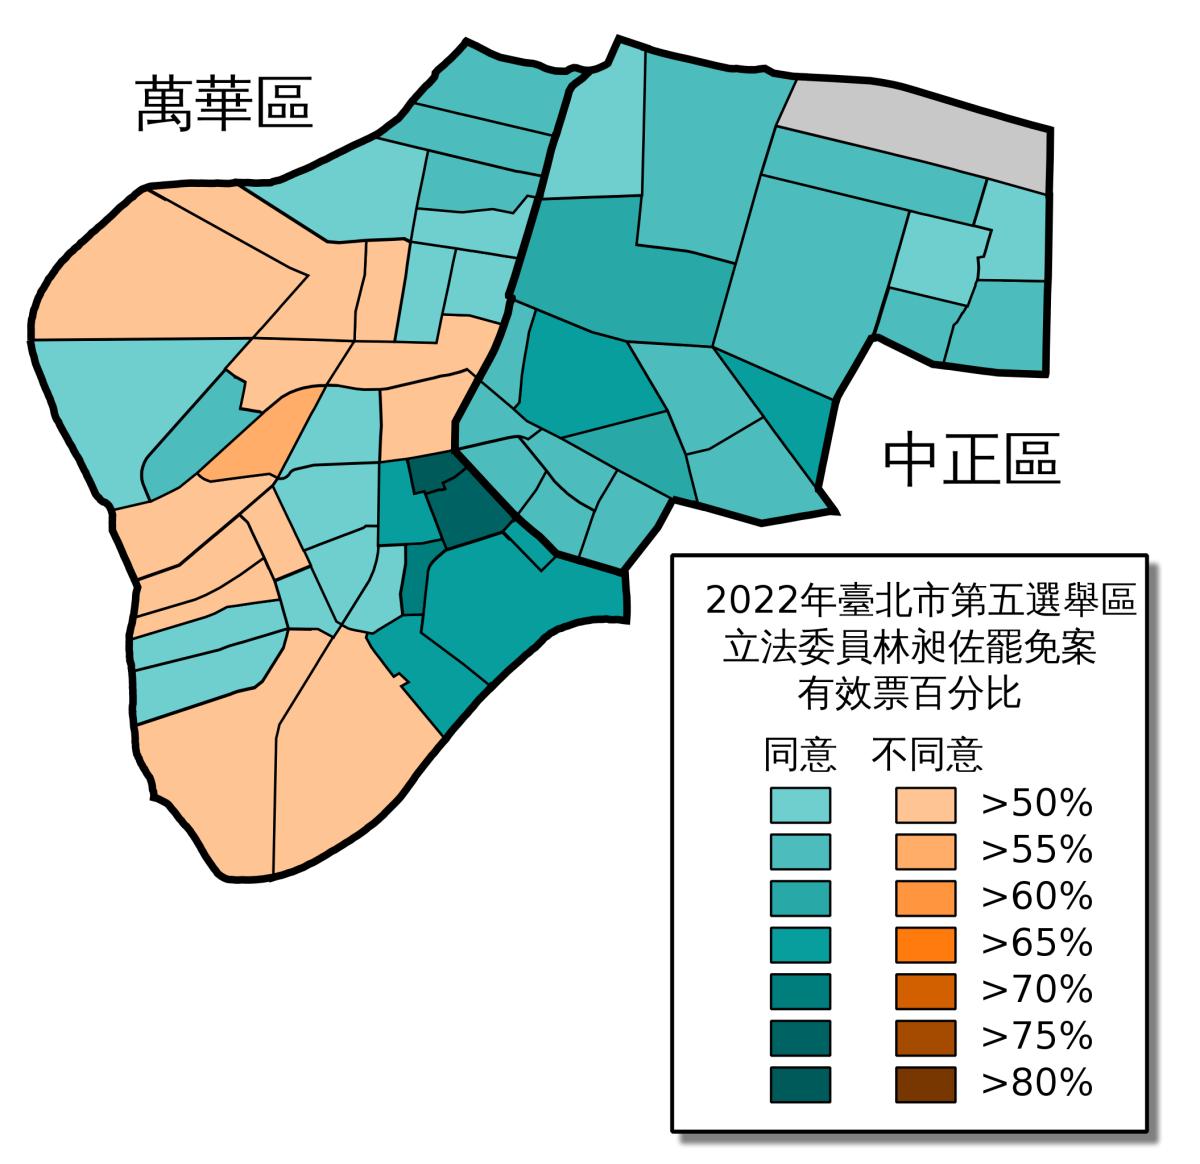 2022_Taipei_Constituency_5_Recall_Vote_Result_Map.svg.png.jpg